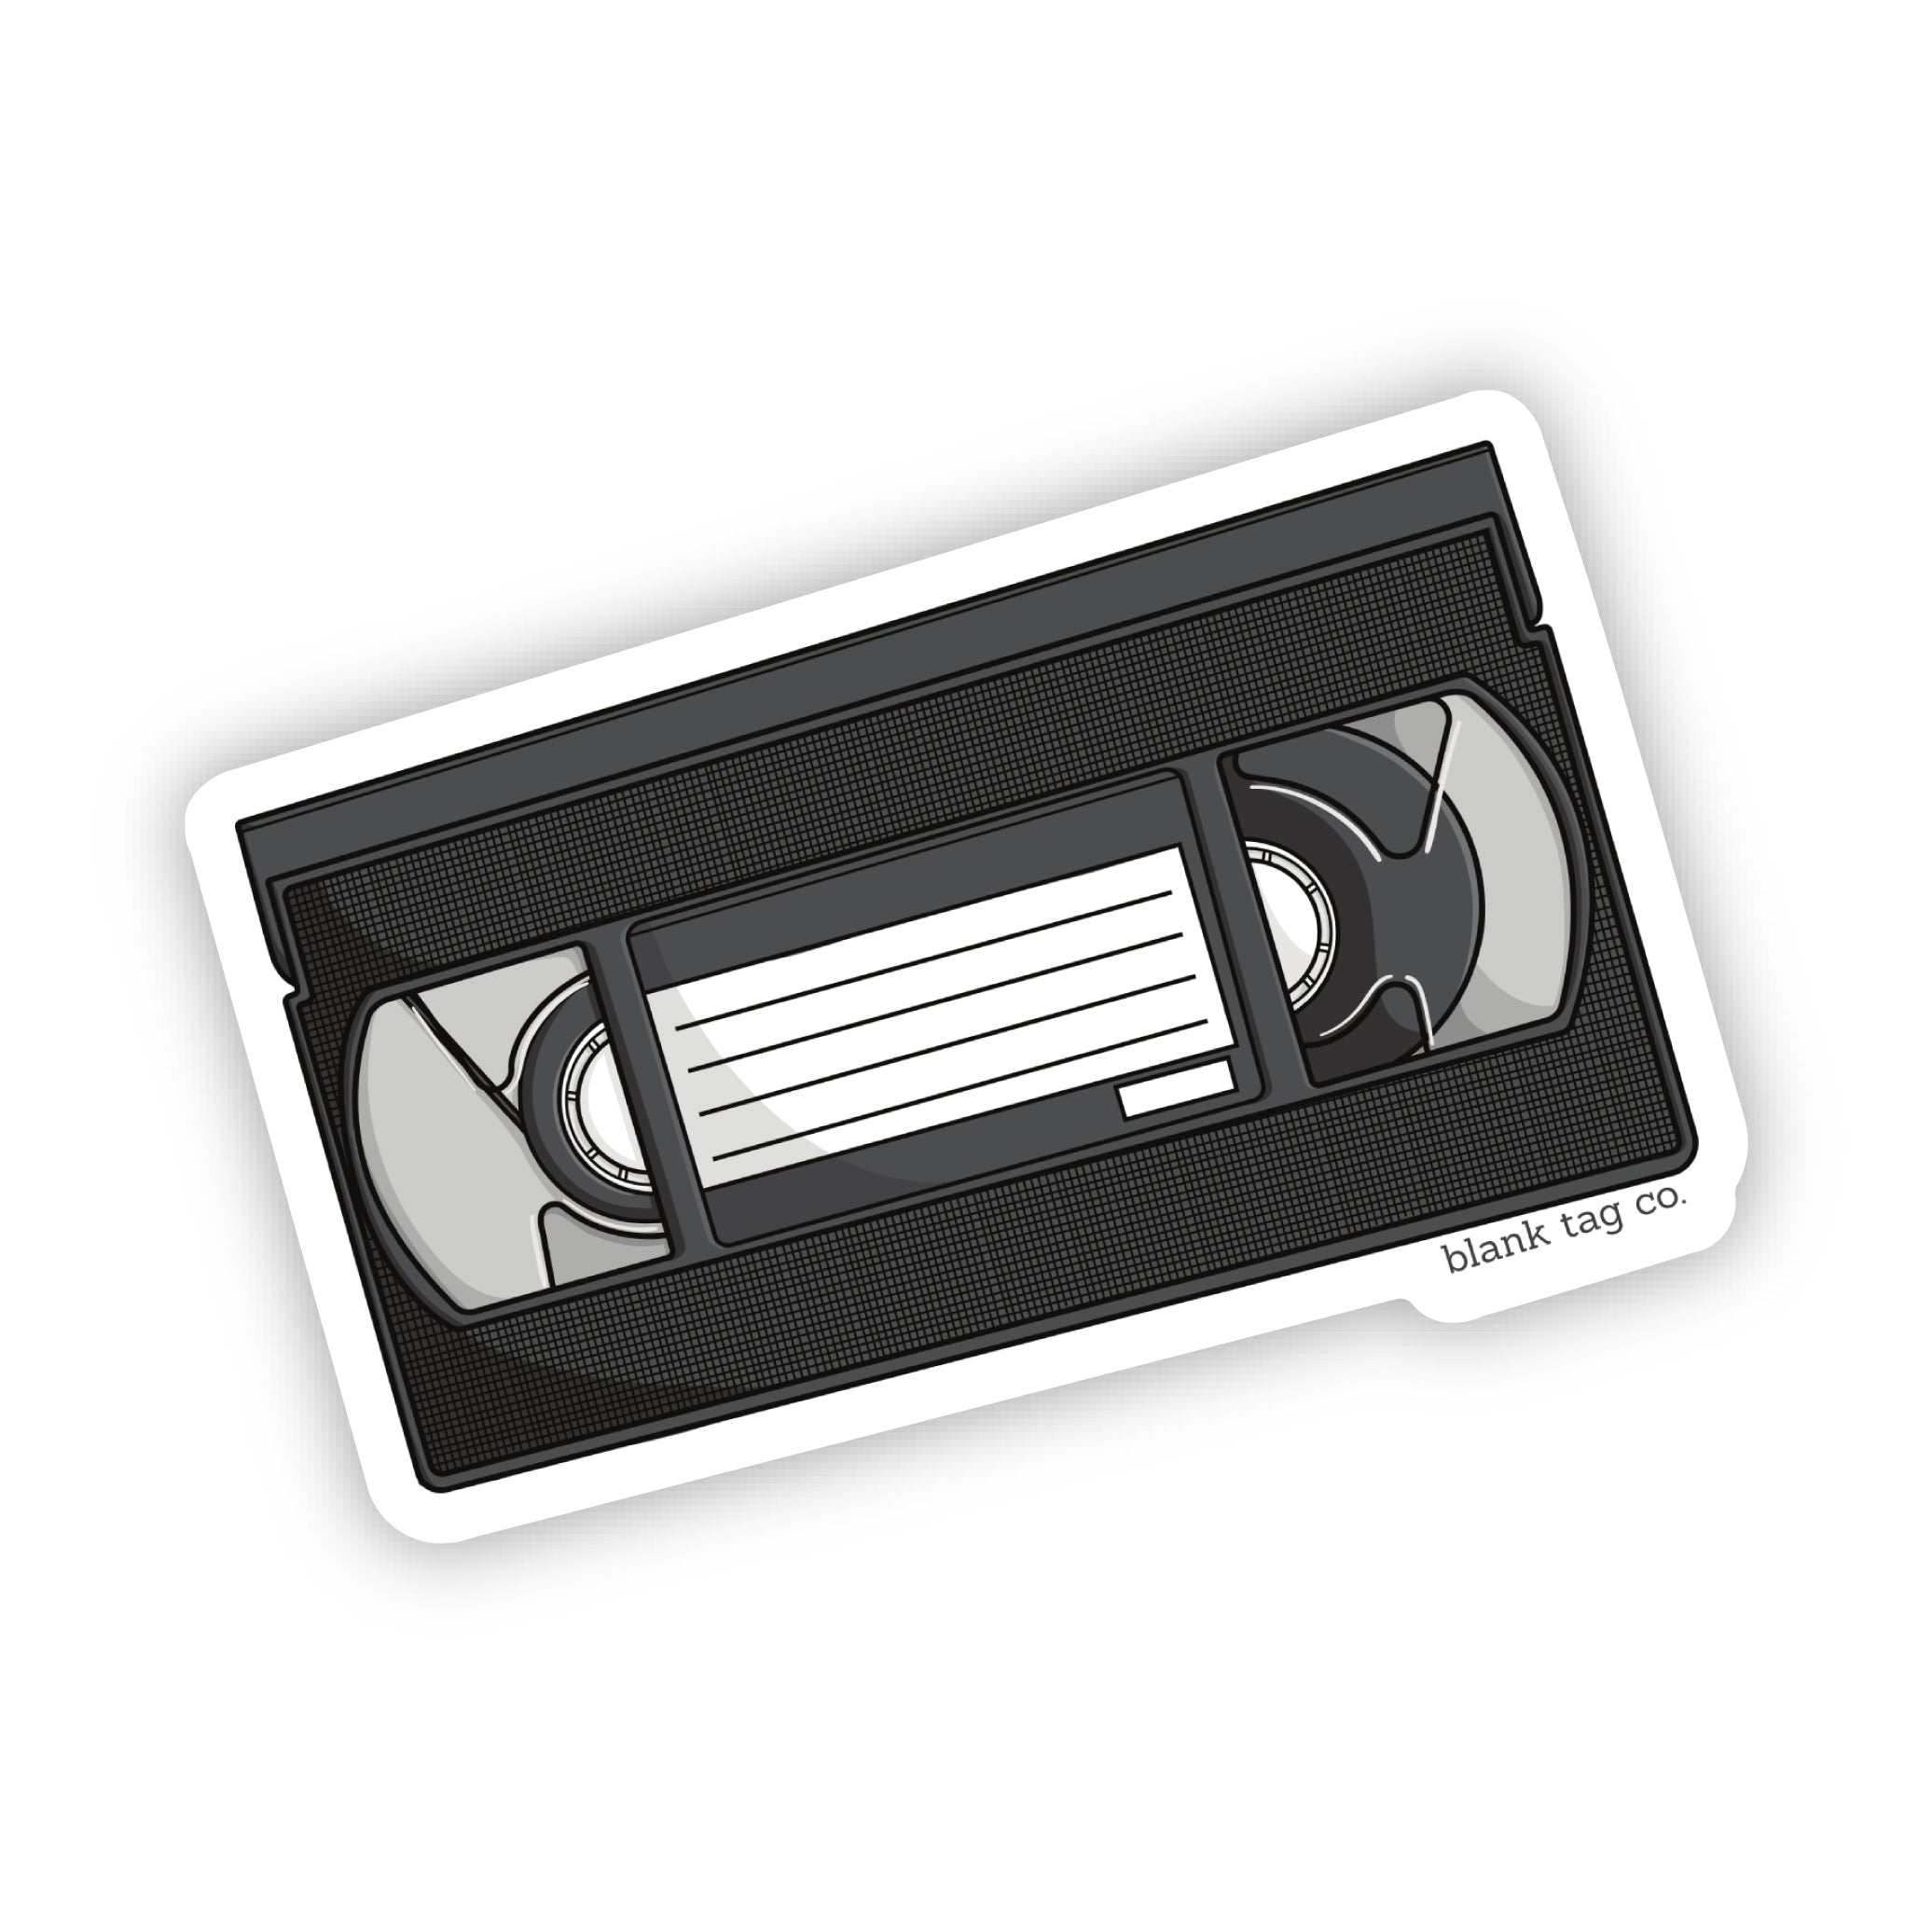 The VHS Tape Sticker